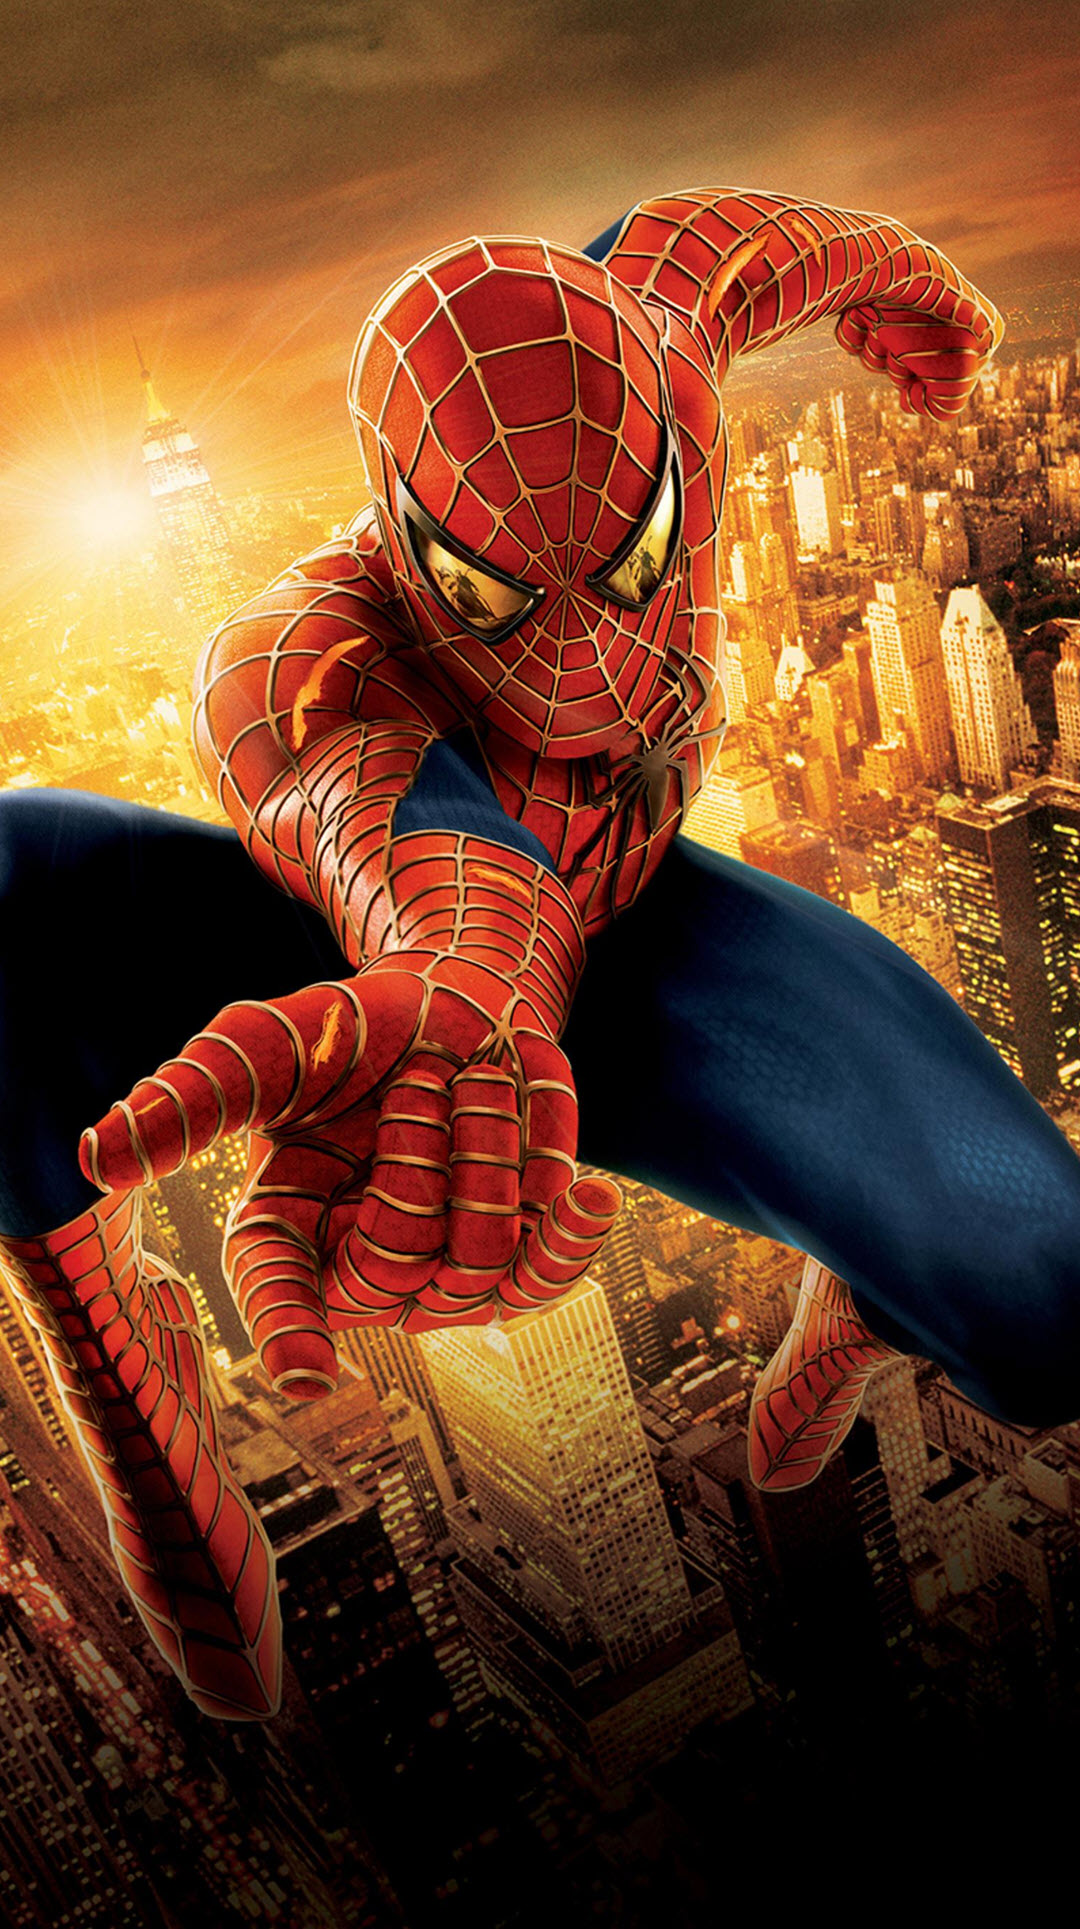 Top 15 Spider-man Wallpapers For Iphone Every Fan Must - Spider Man 2002 - HD Wallpaper 